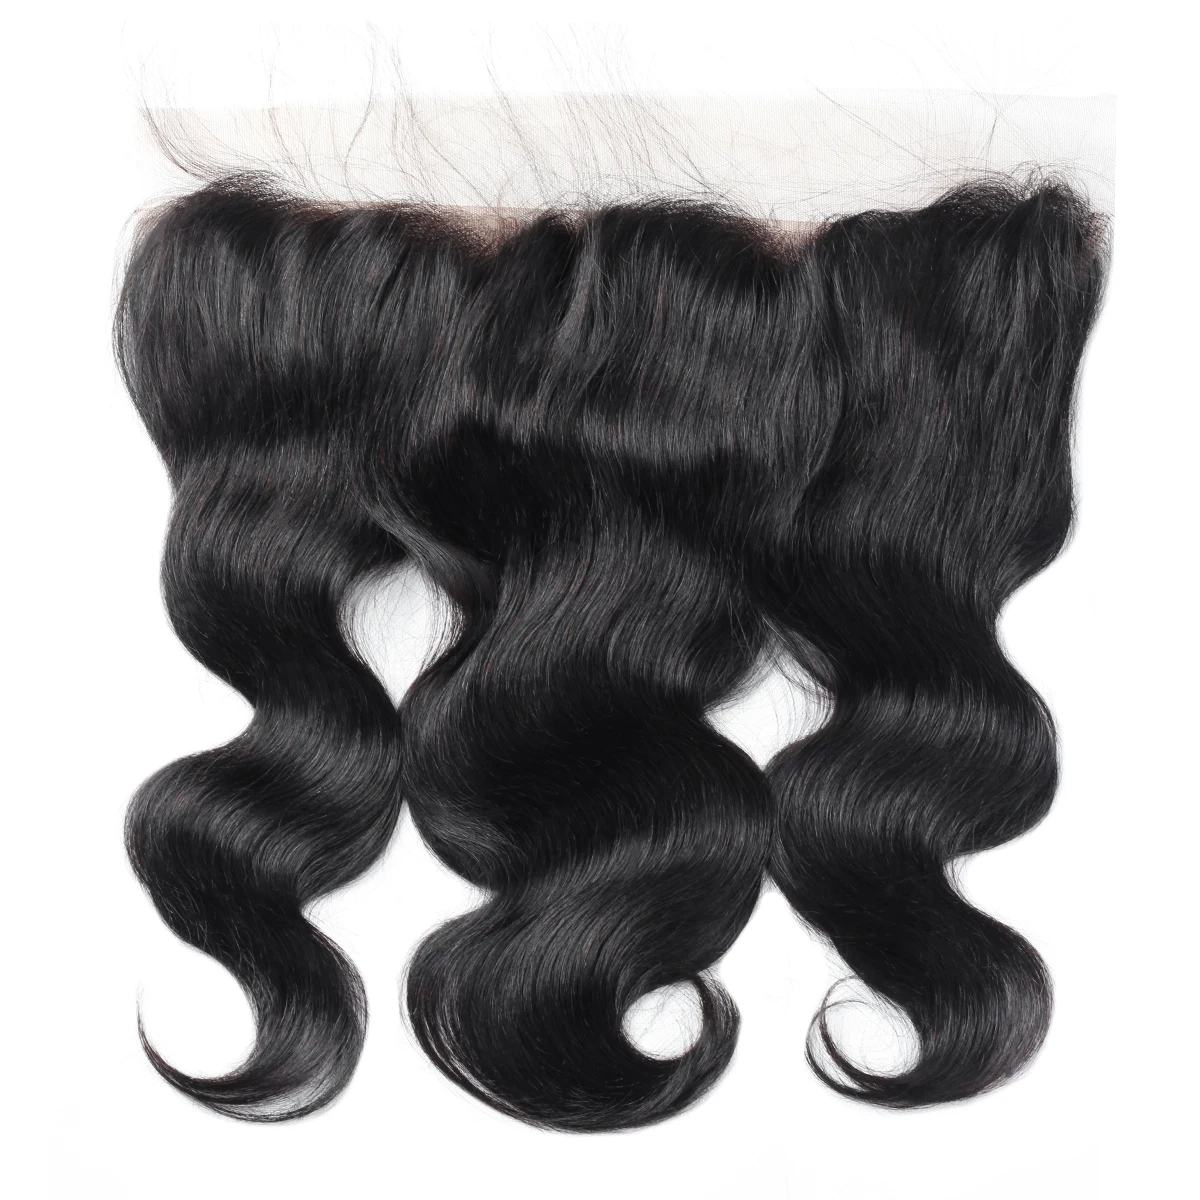 

Vast high quality vietnam virgin raw human hair body wave full lace 13*4 front top closure, Natural color,1b#,1#(can be dyed any color)